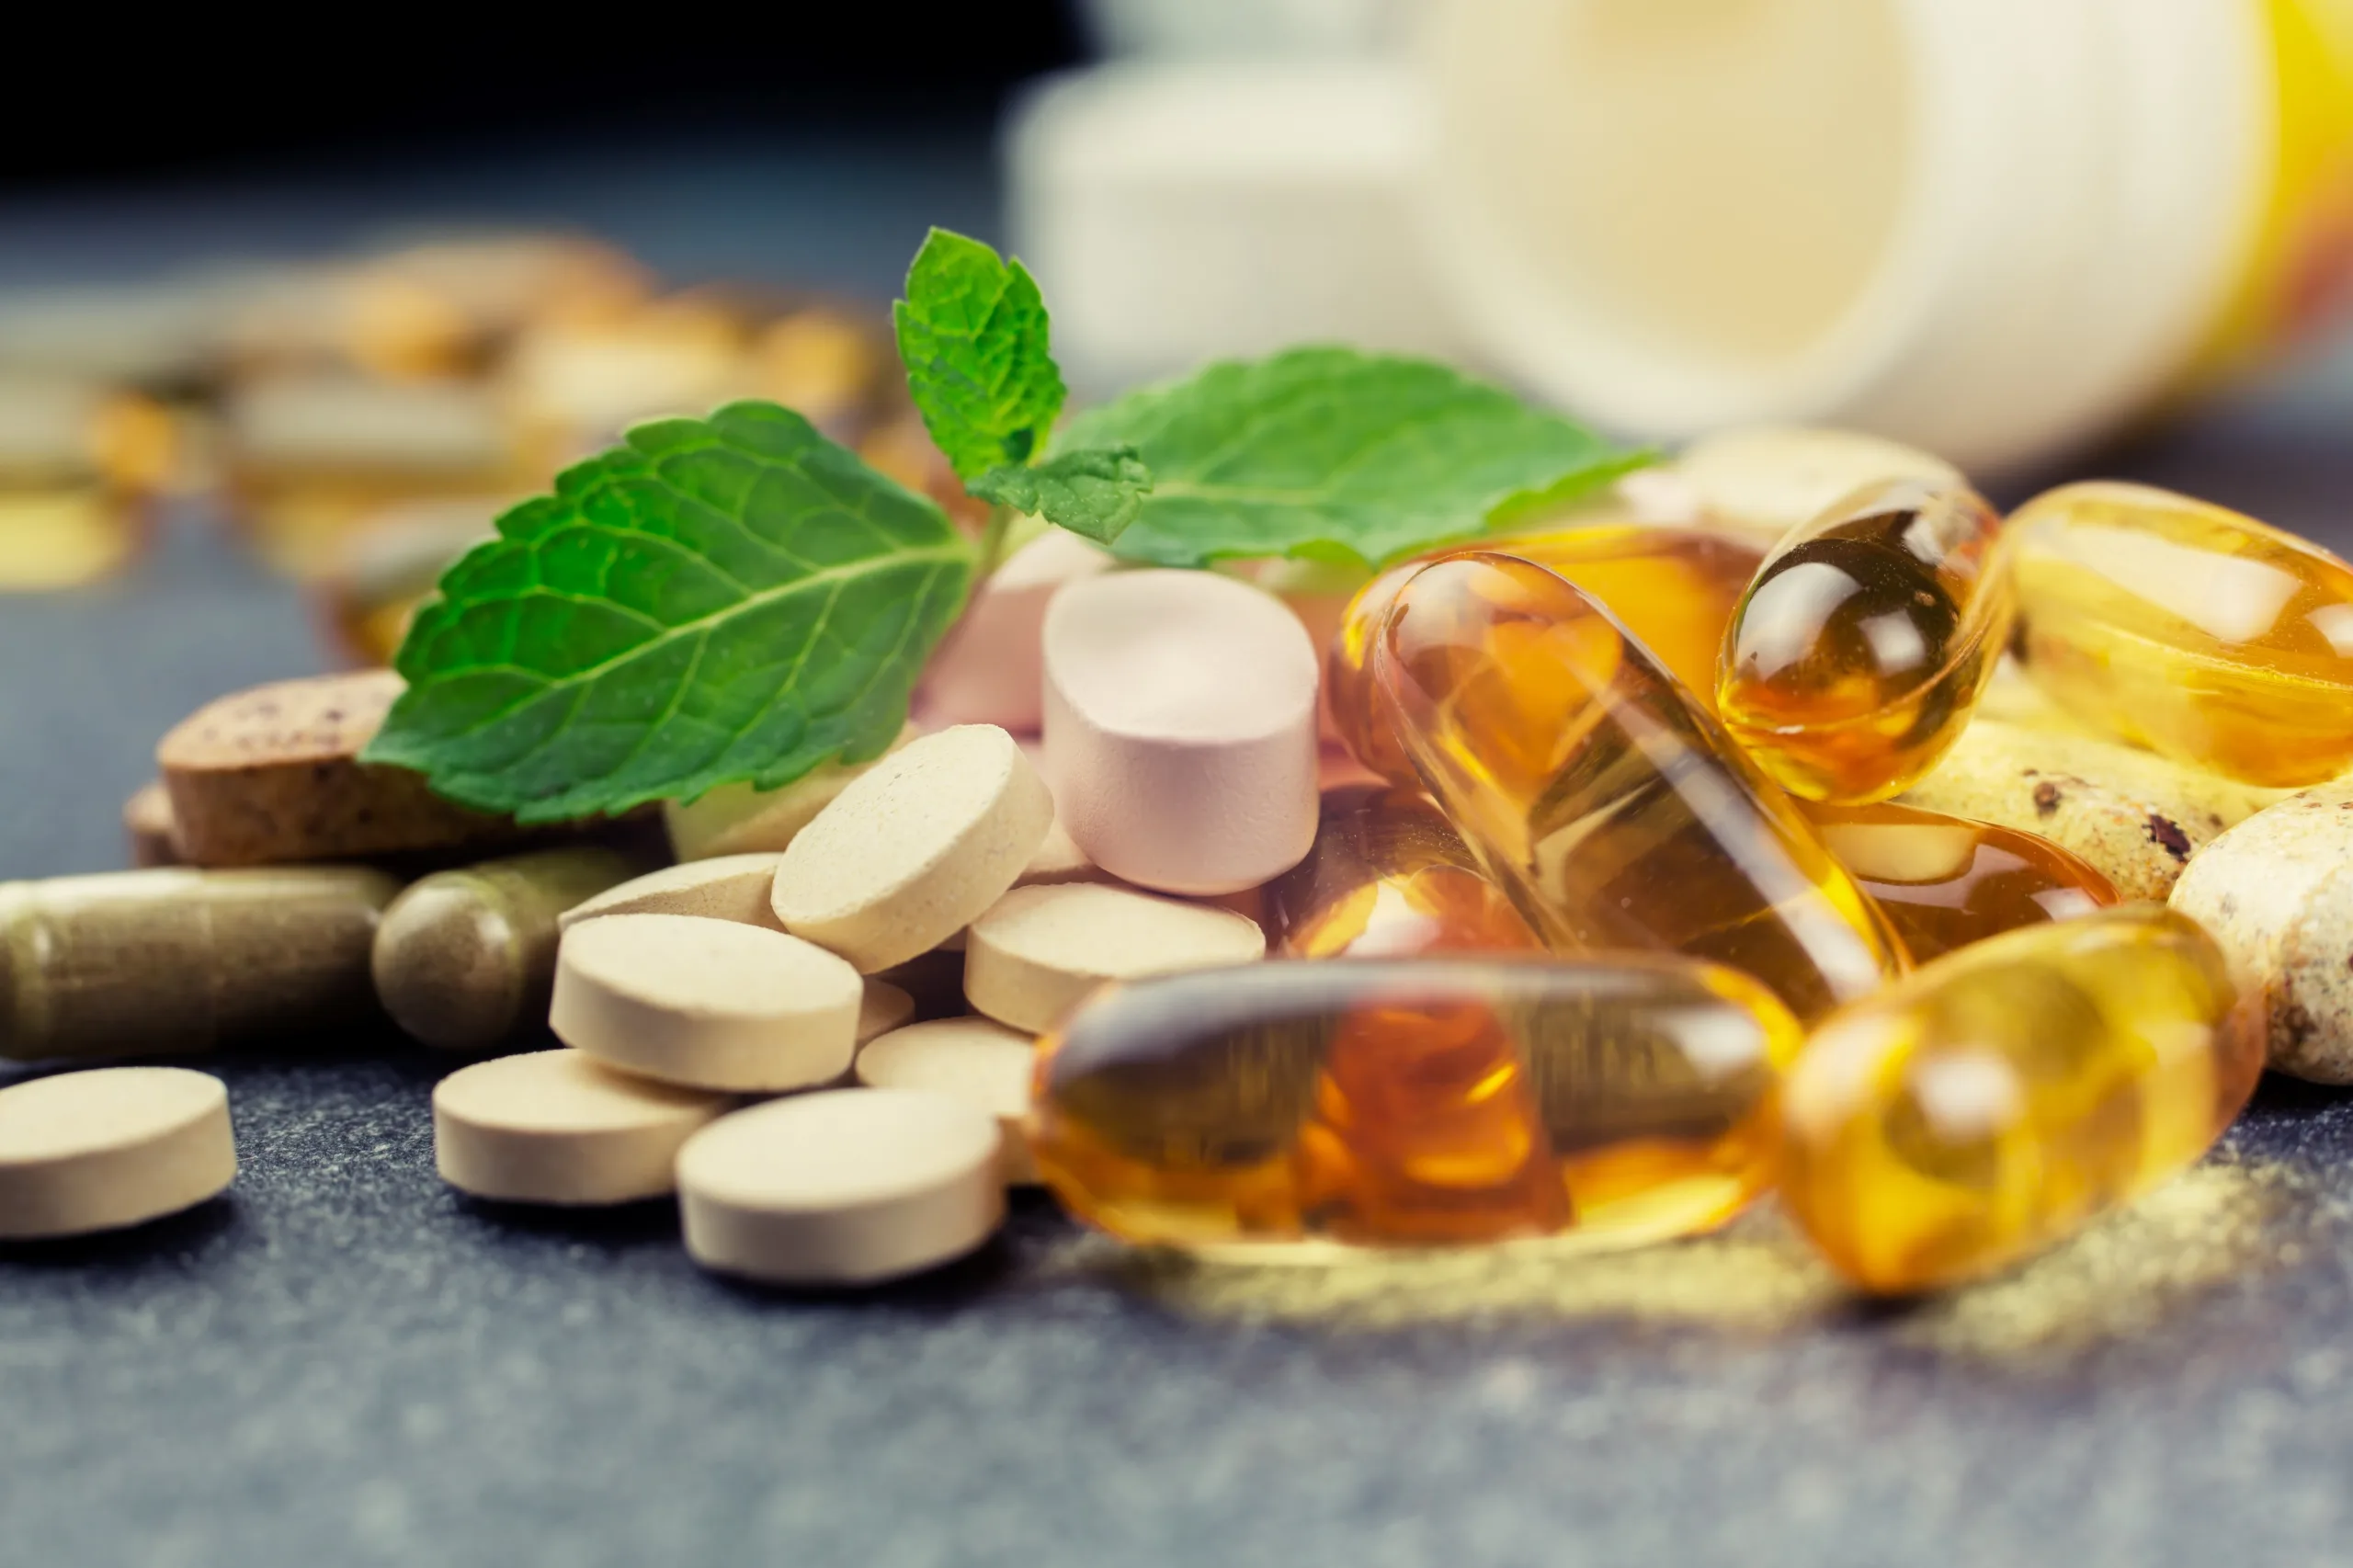 Dysphagia Supplements Market Challenges and Opportunities (2022-2030) - guestts